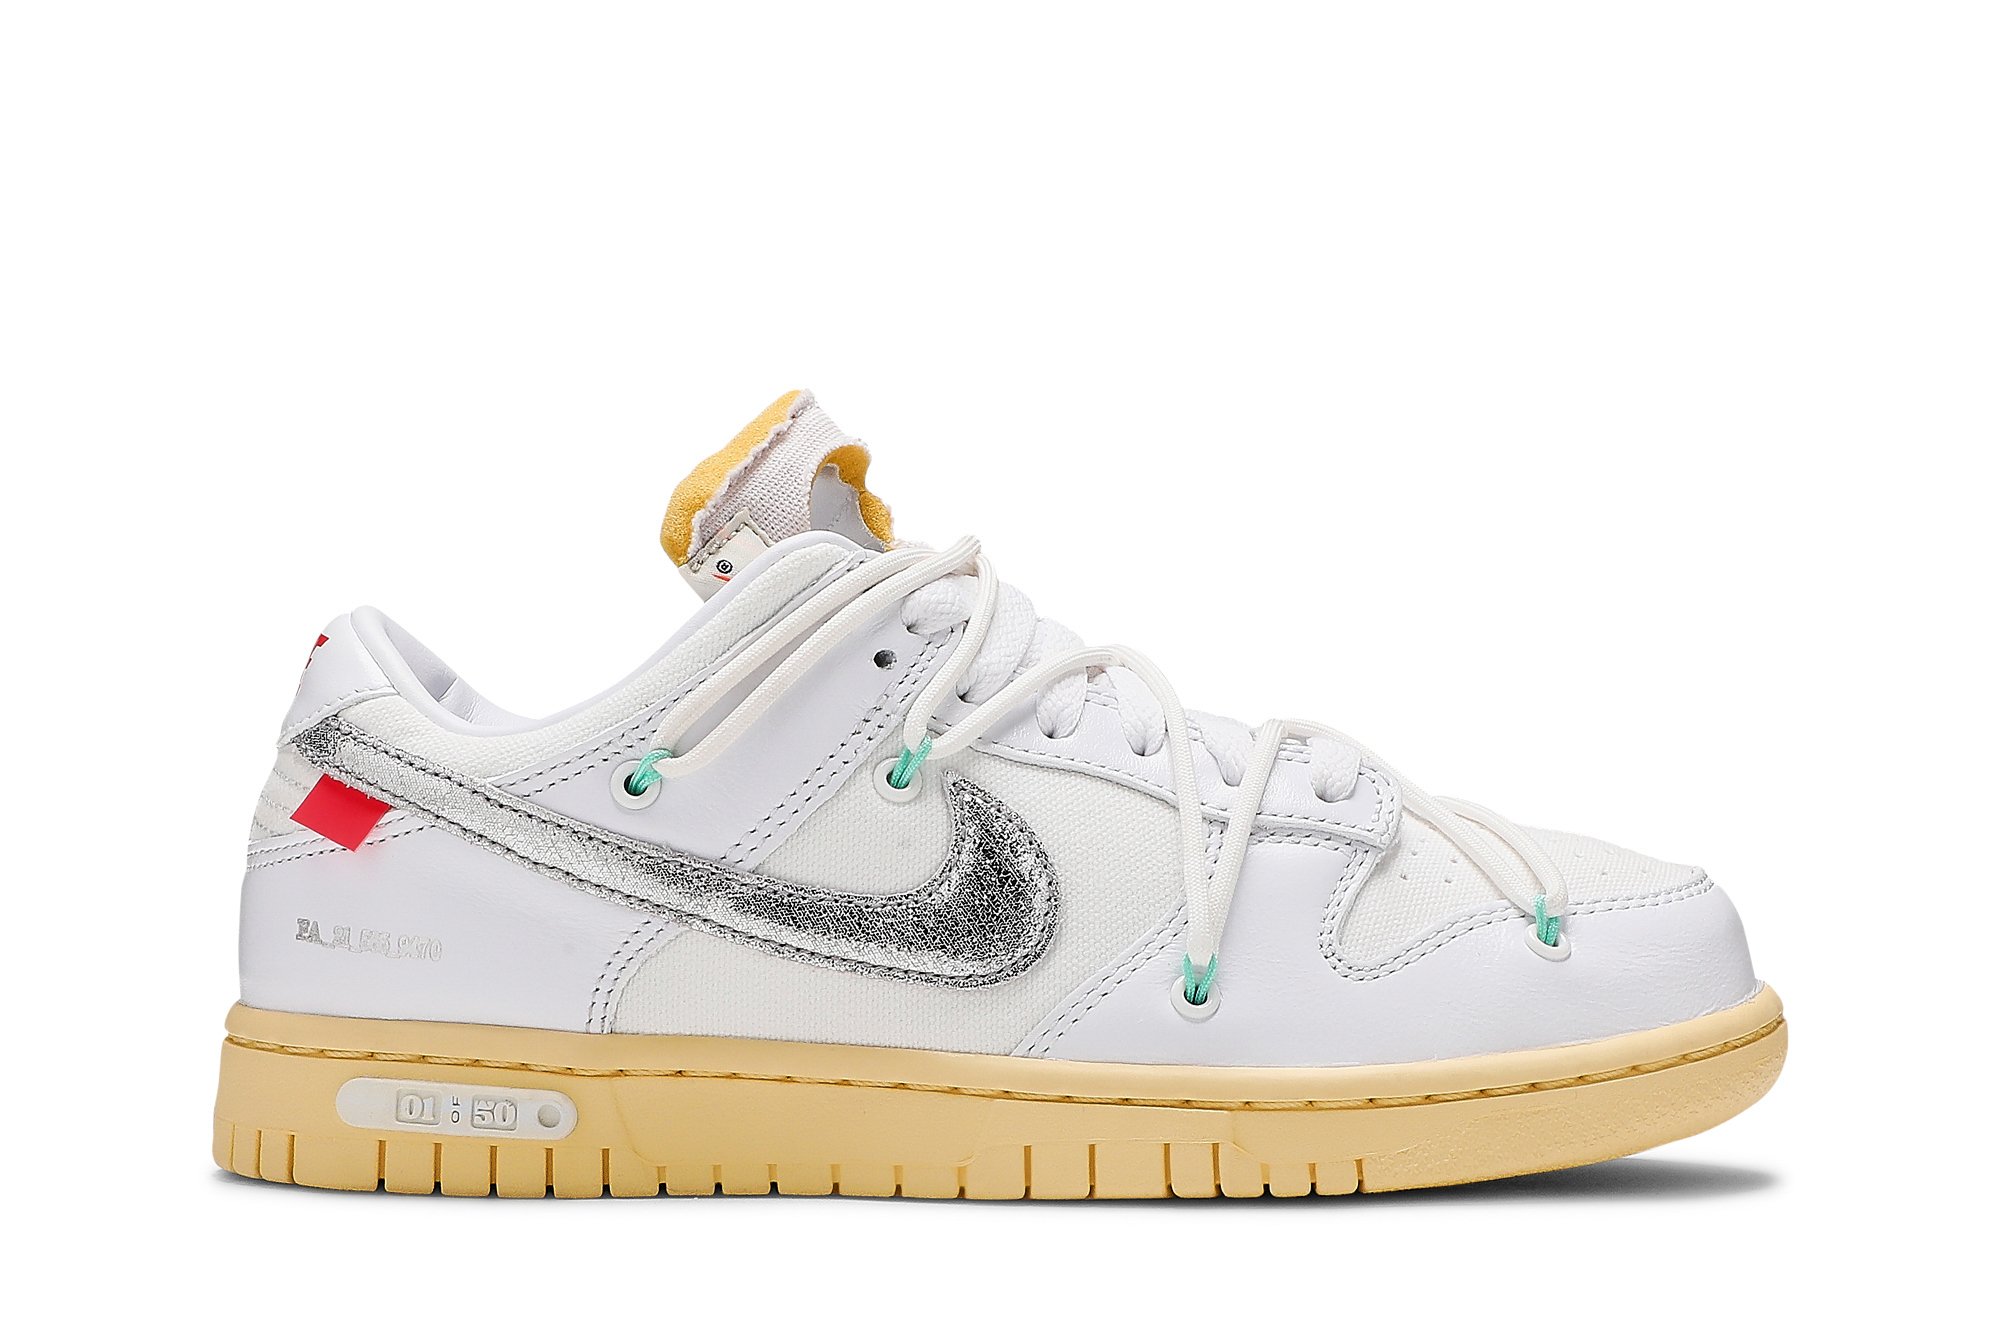 Buy Off-White x Dunk Low 'Lot 01 of 50' - DM1602 127 | GOAT